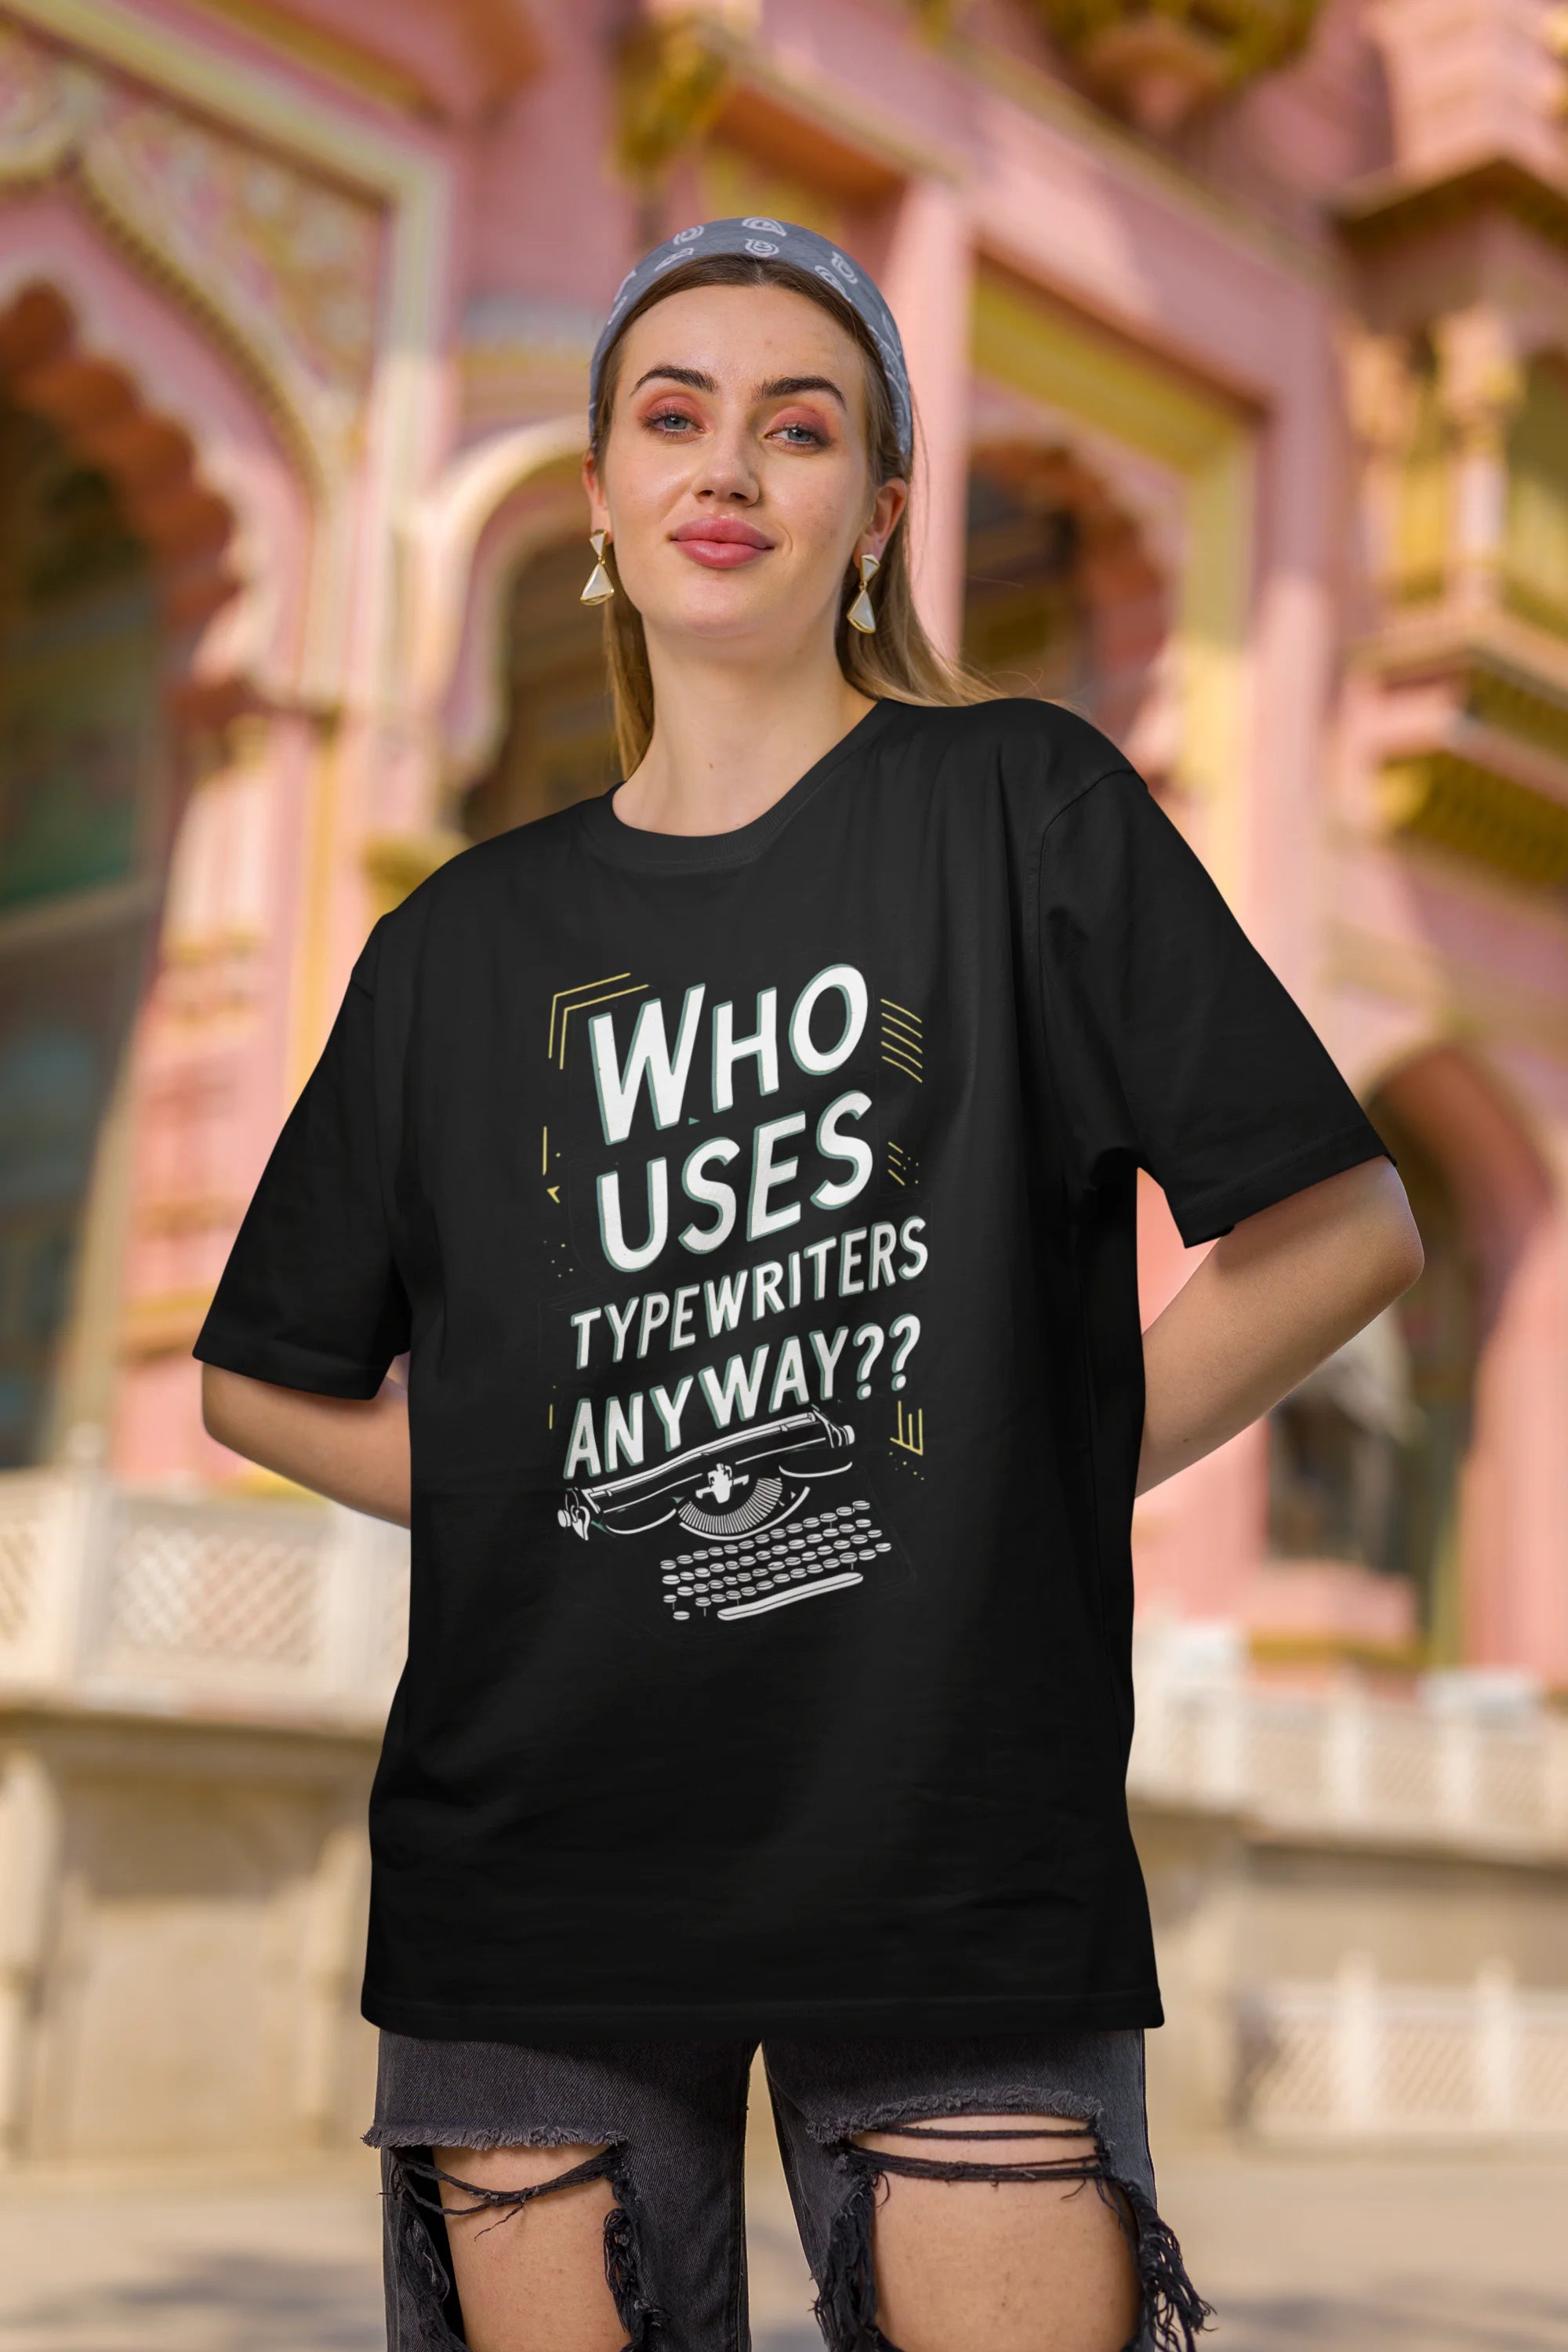 Second Image of a woman wearing black Oversize t-shirt featuring TTPD design inspired by Taylor Swift's Eras Tour.